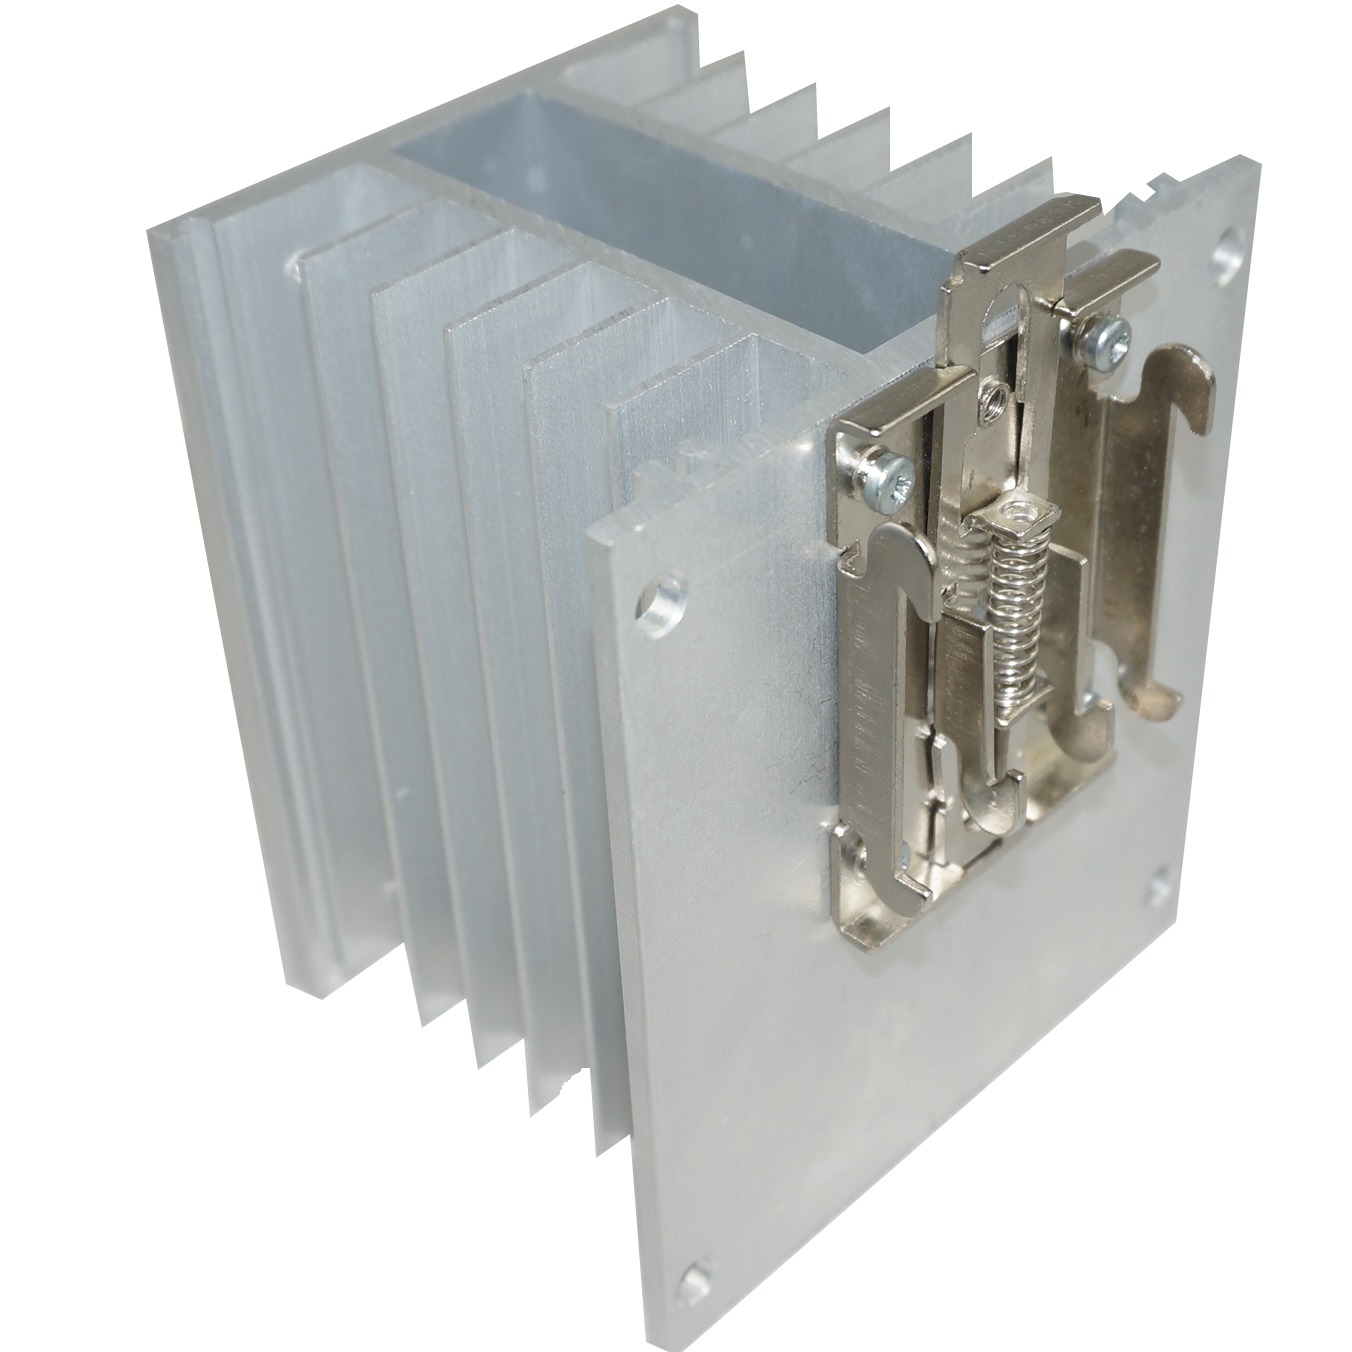 FTH6053ZD3 + HS212DR, Solid State Relay, and Heatsink Assembly, 3 Phase 3-32VDC Control, 20 Amp per phase @ 40 Deg C, 48-530VAC Load, LED Status Indicator, with IP20 Cover